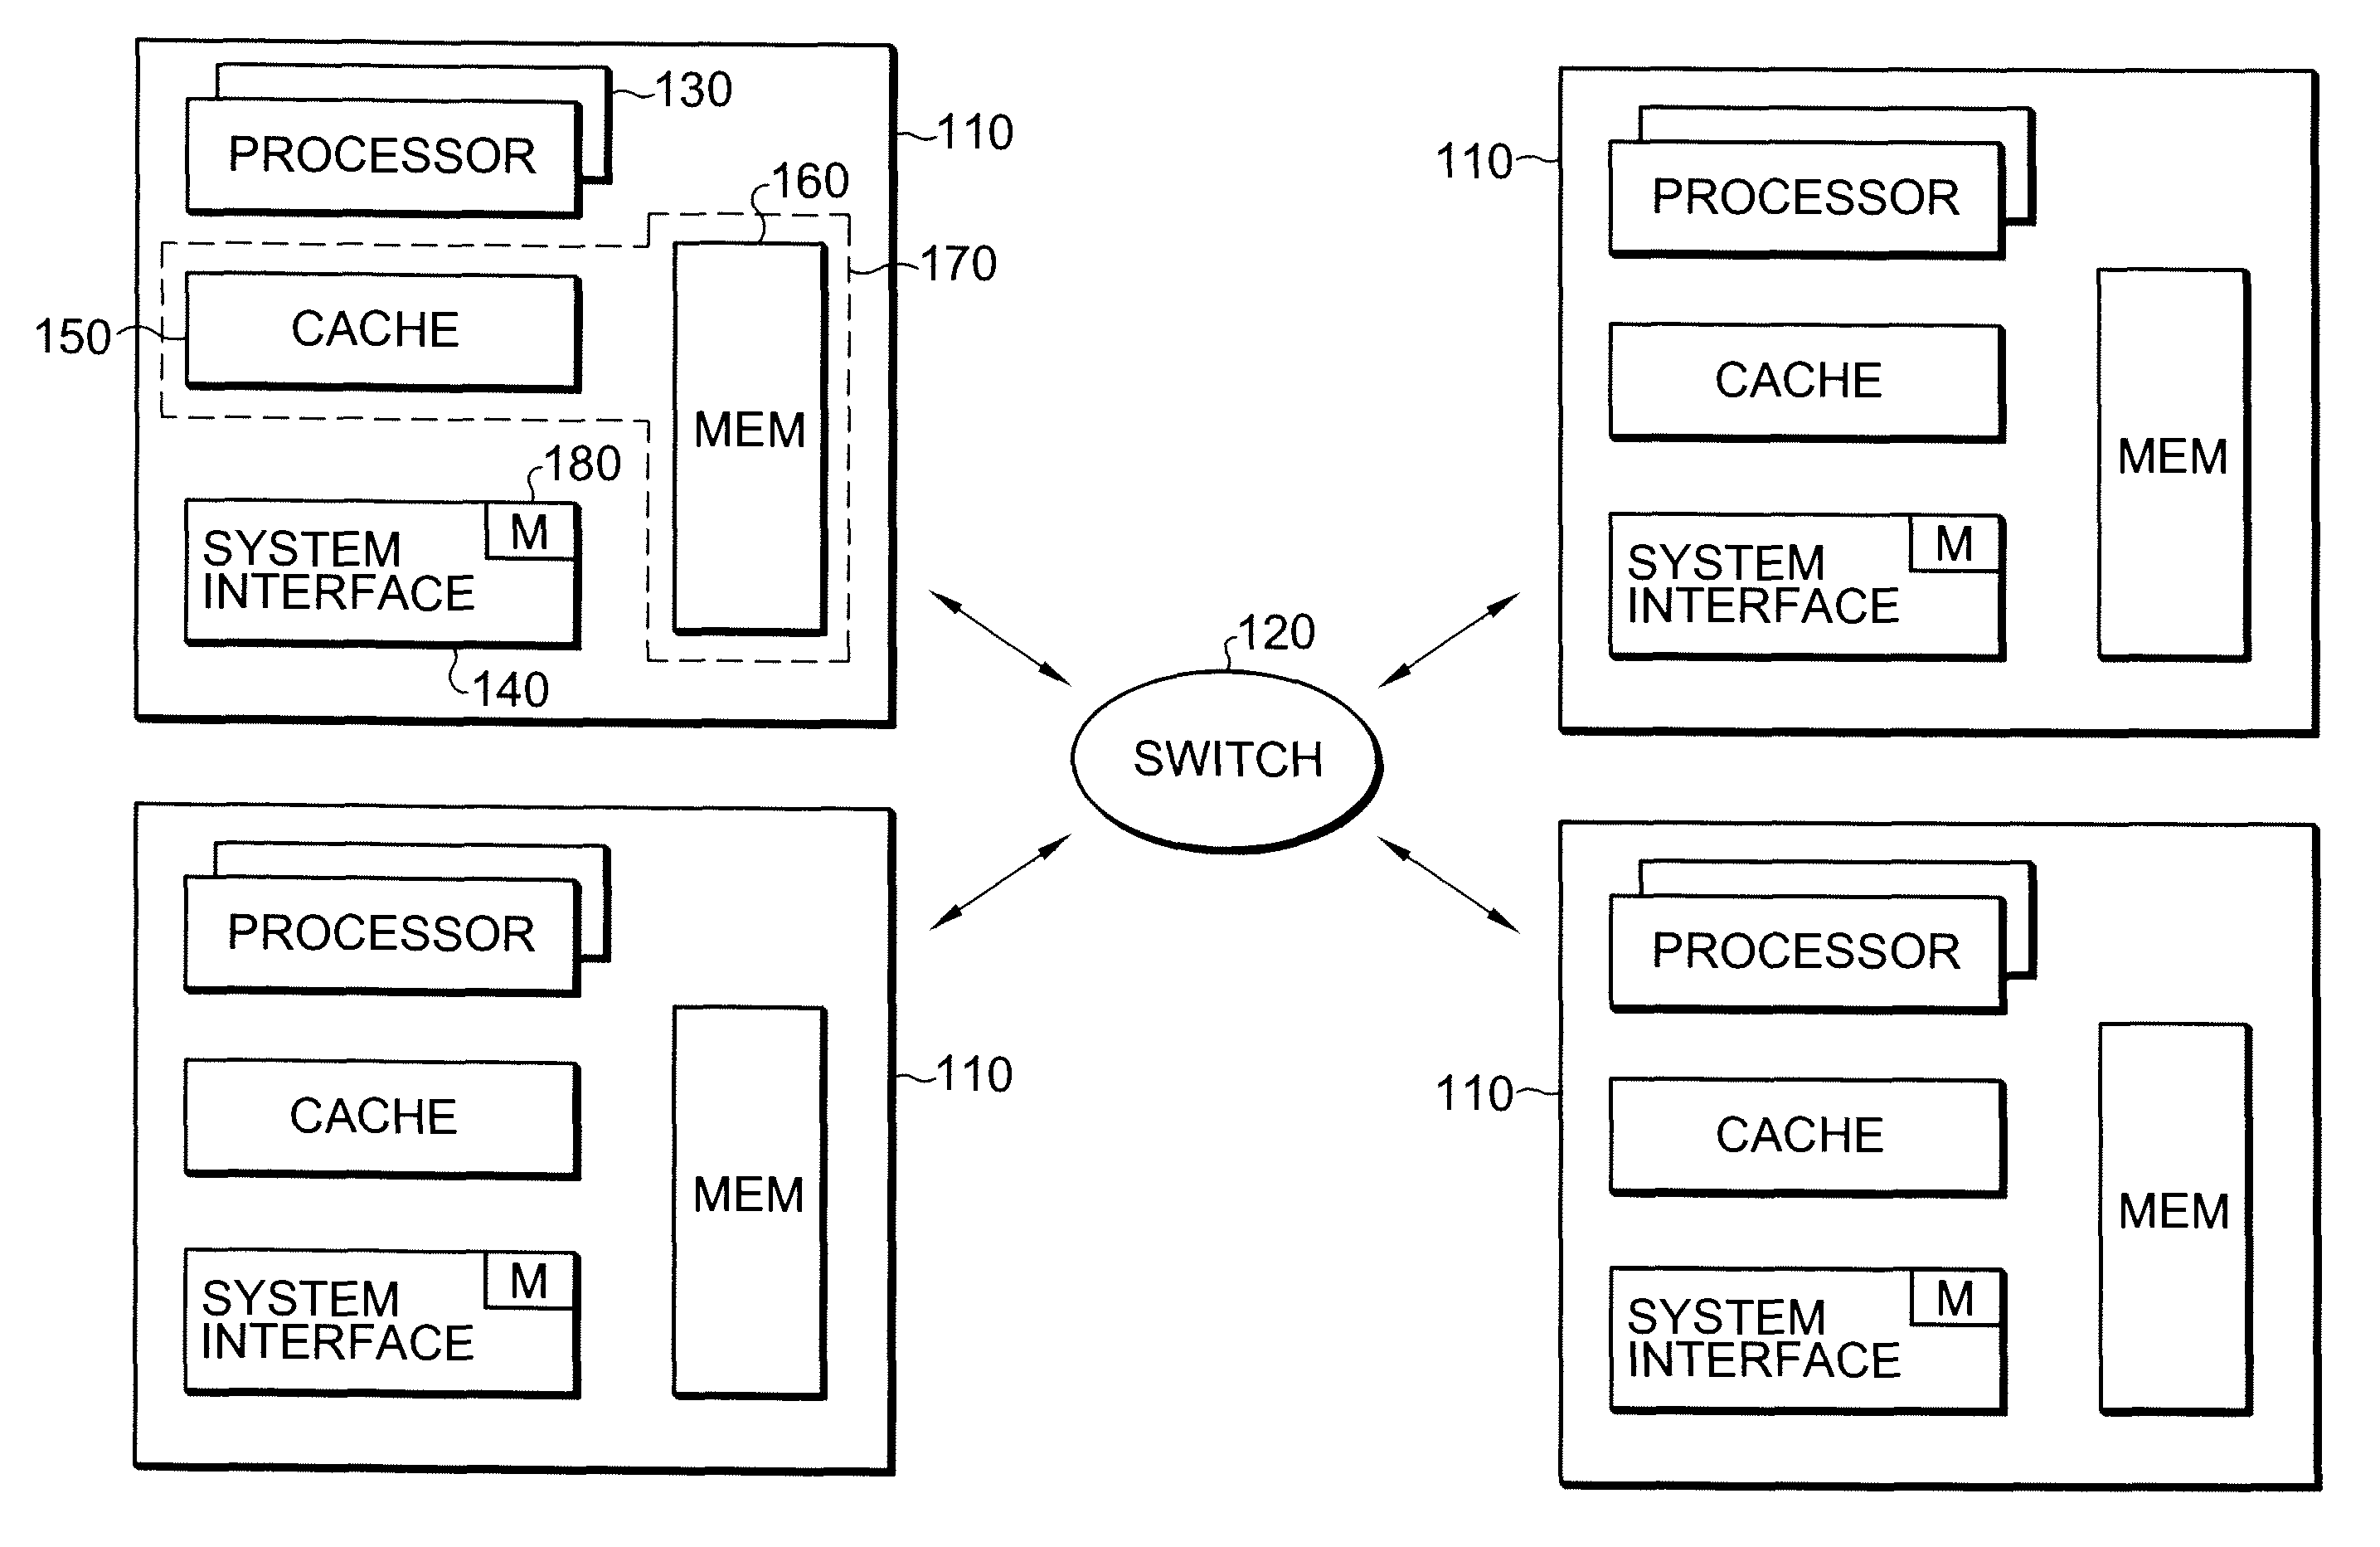 Hybrid cache coherence using fine-grained hardware message passing